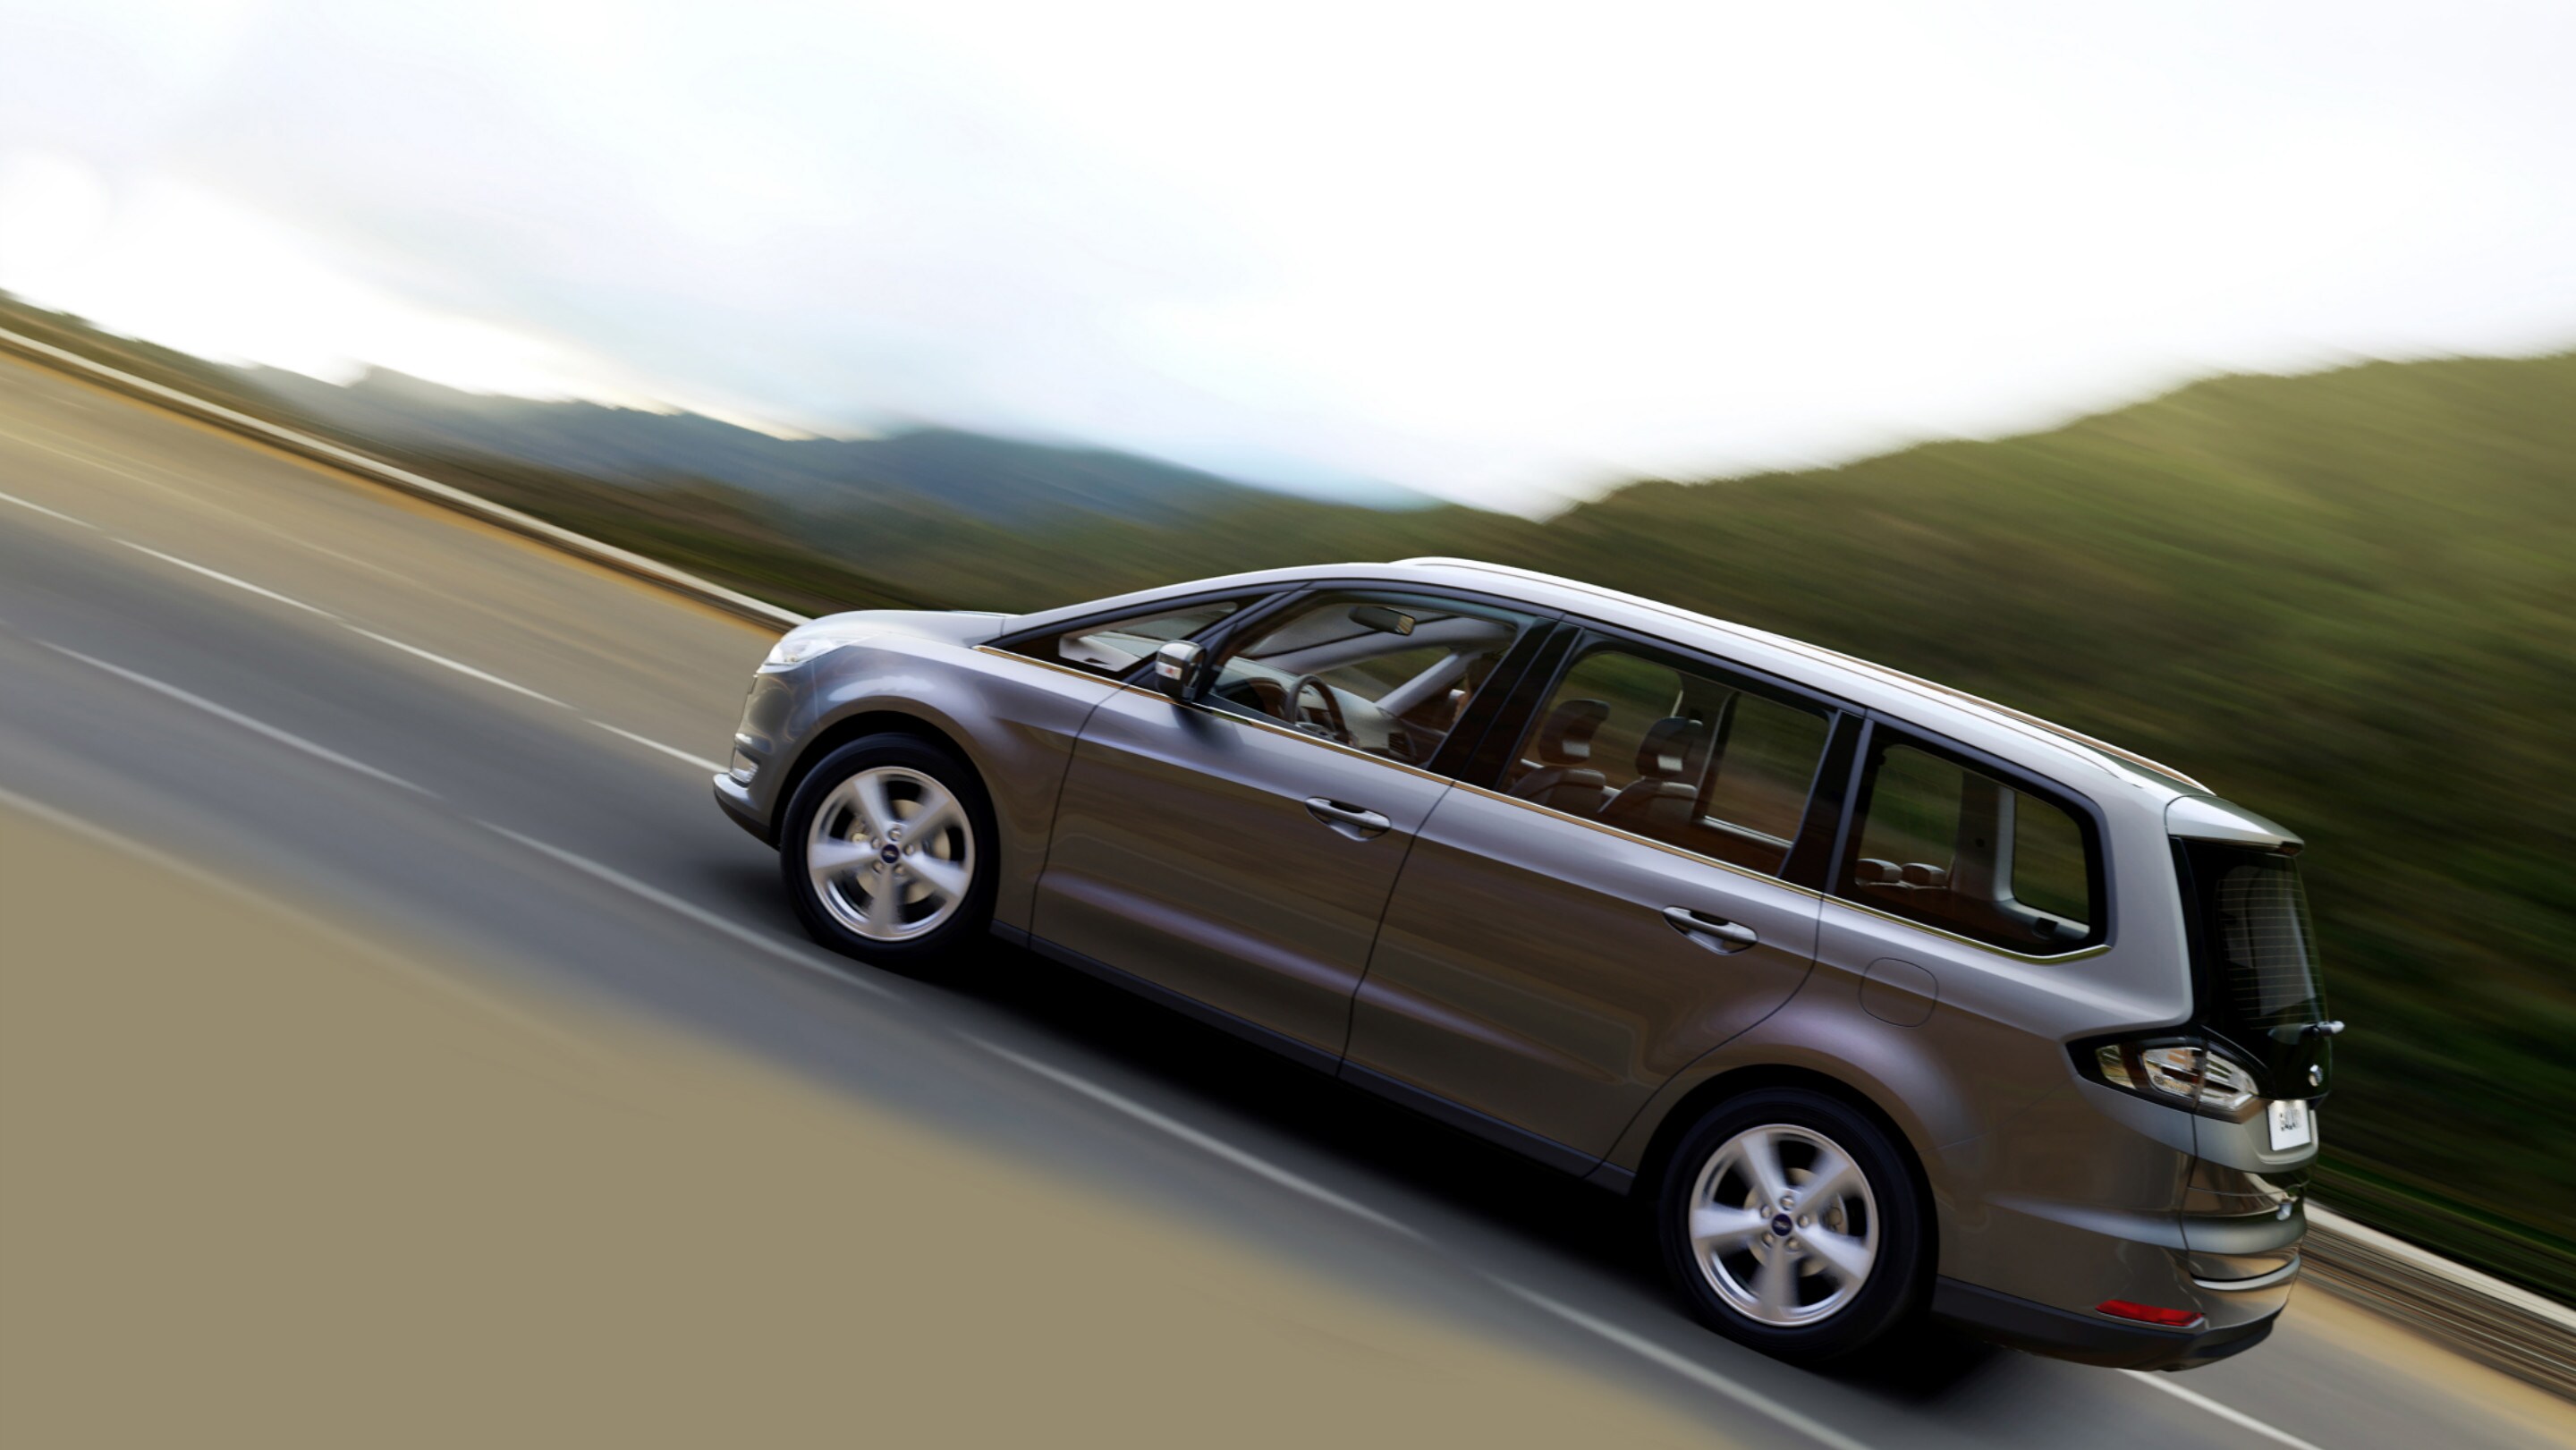 Grey Ford Galaxy driving uphill on the road